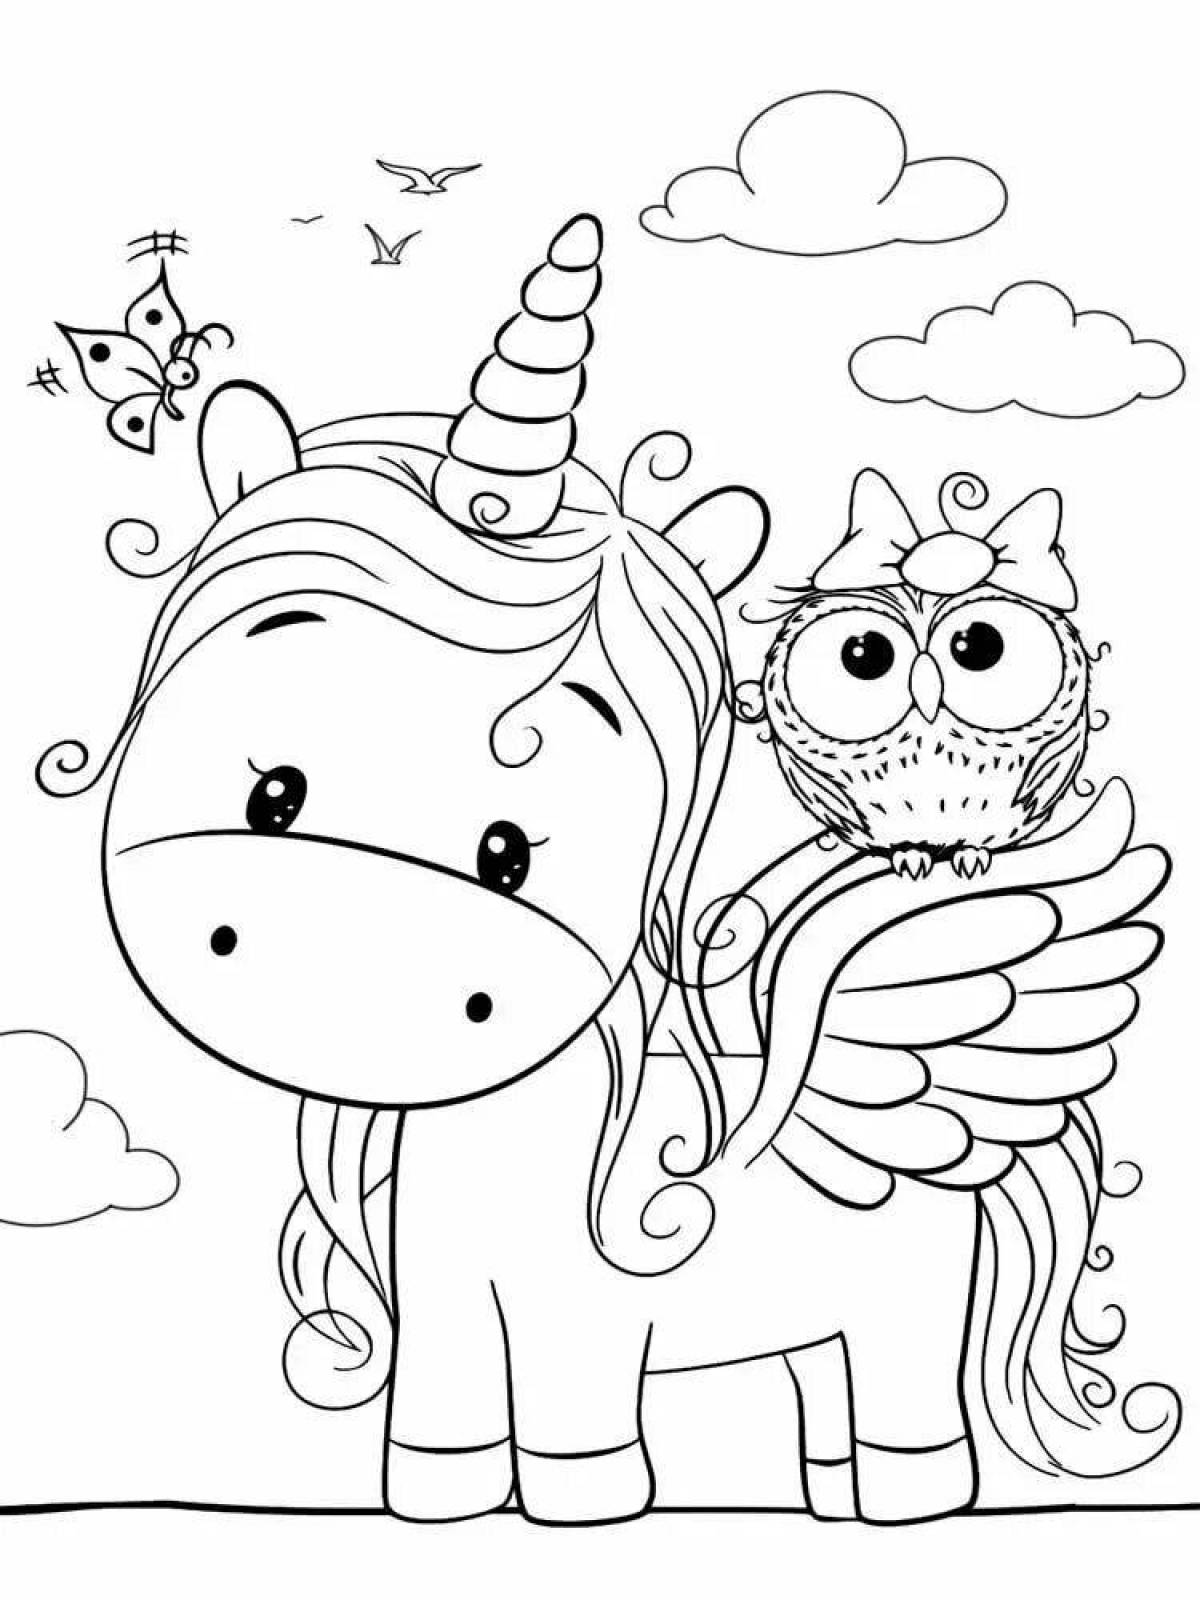 Gorgeous coloring book for girls 6 years old unicorn